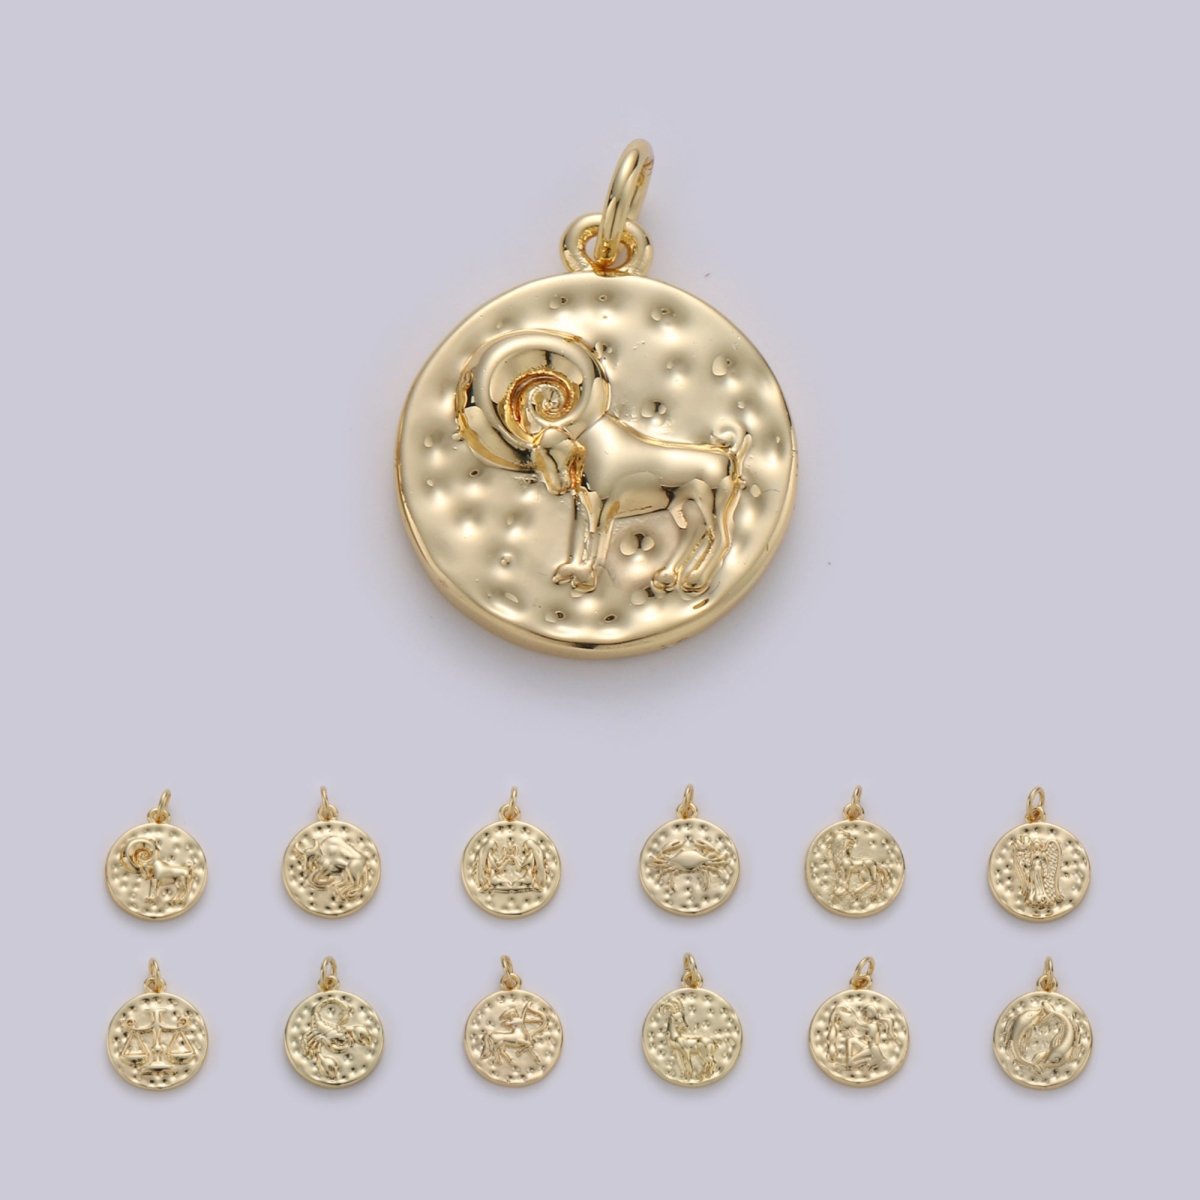 14K Gold Filled Zodiac Constellation Charms, Zodiac Symbol, Horoscope Charm, Gold Astrological Zodiac Signs, Double Sided Charm Pendant | A-326-A-337 - DLUXCA